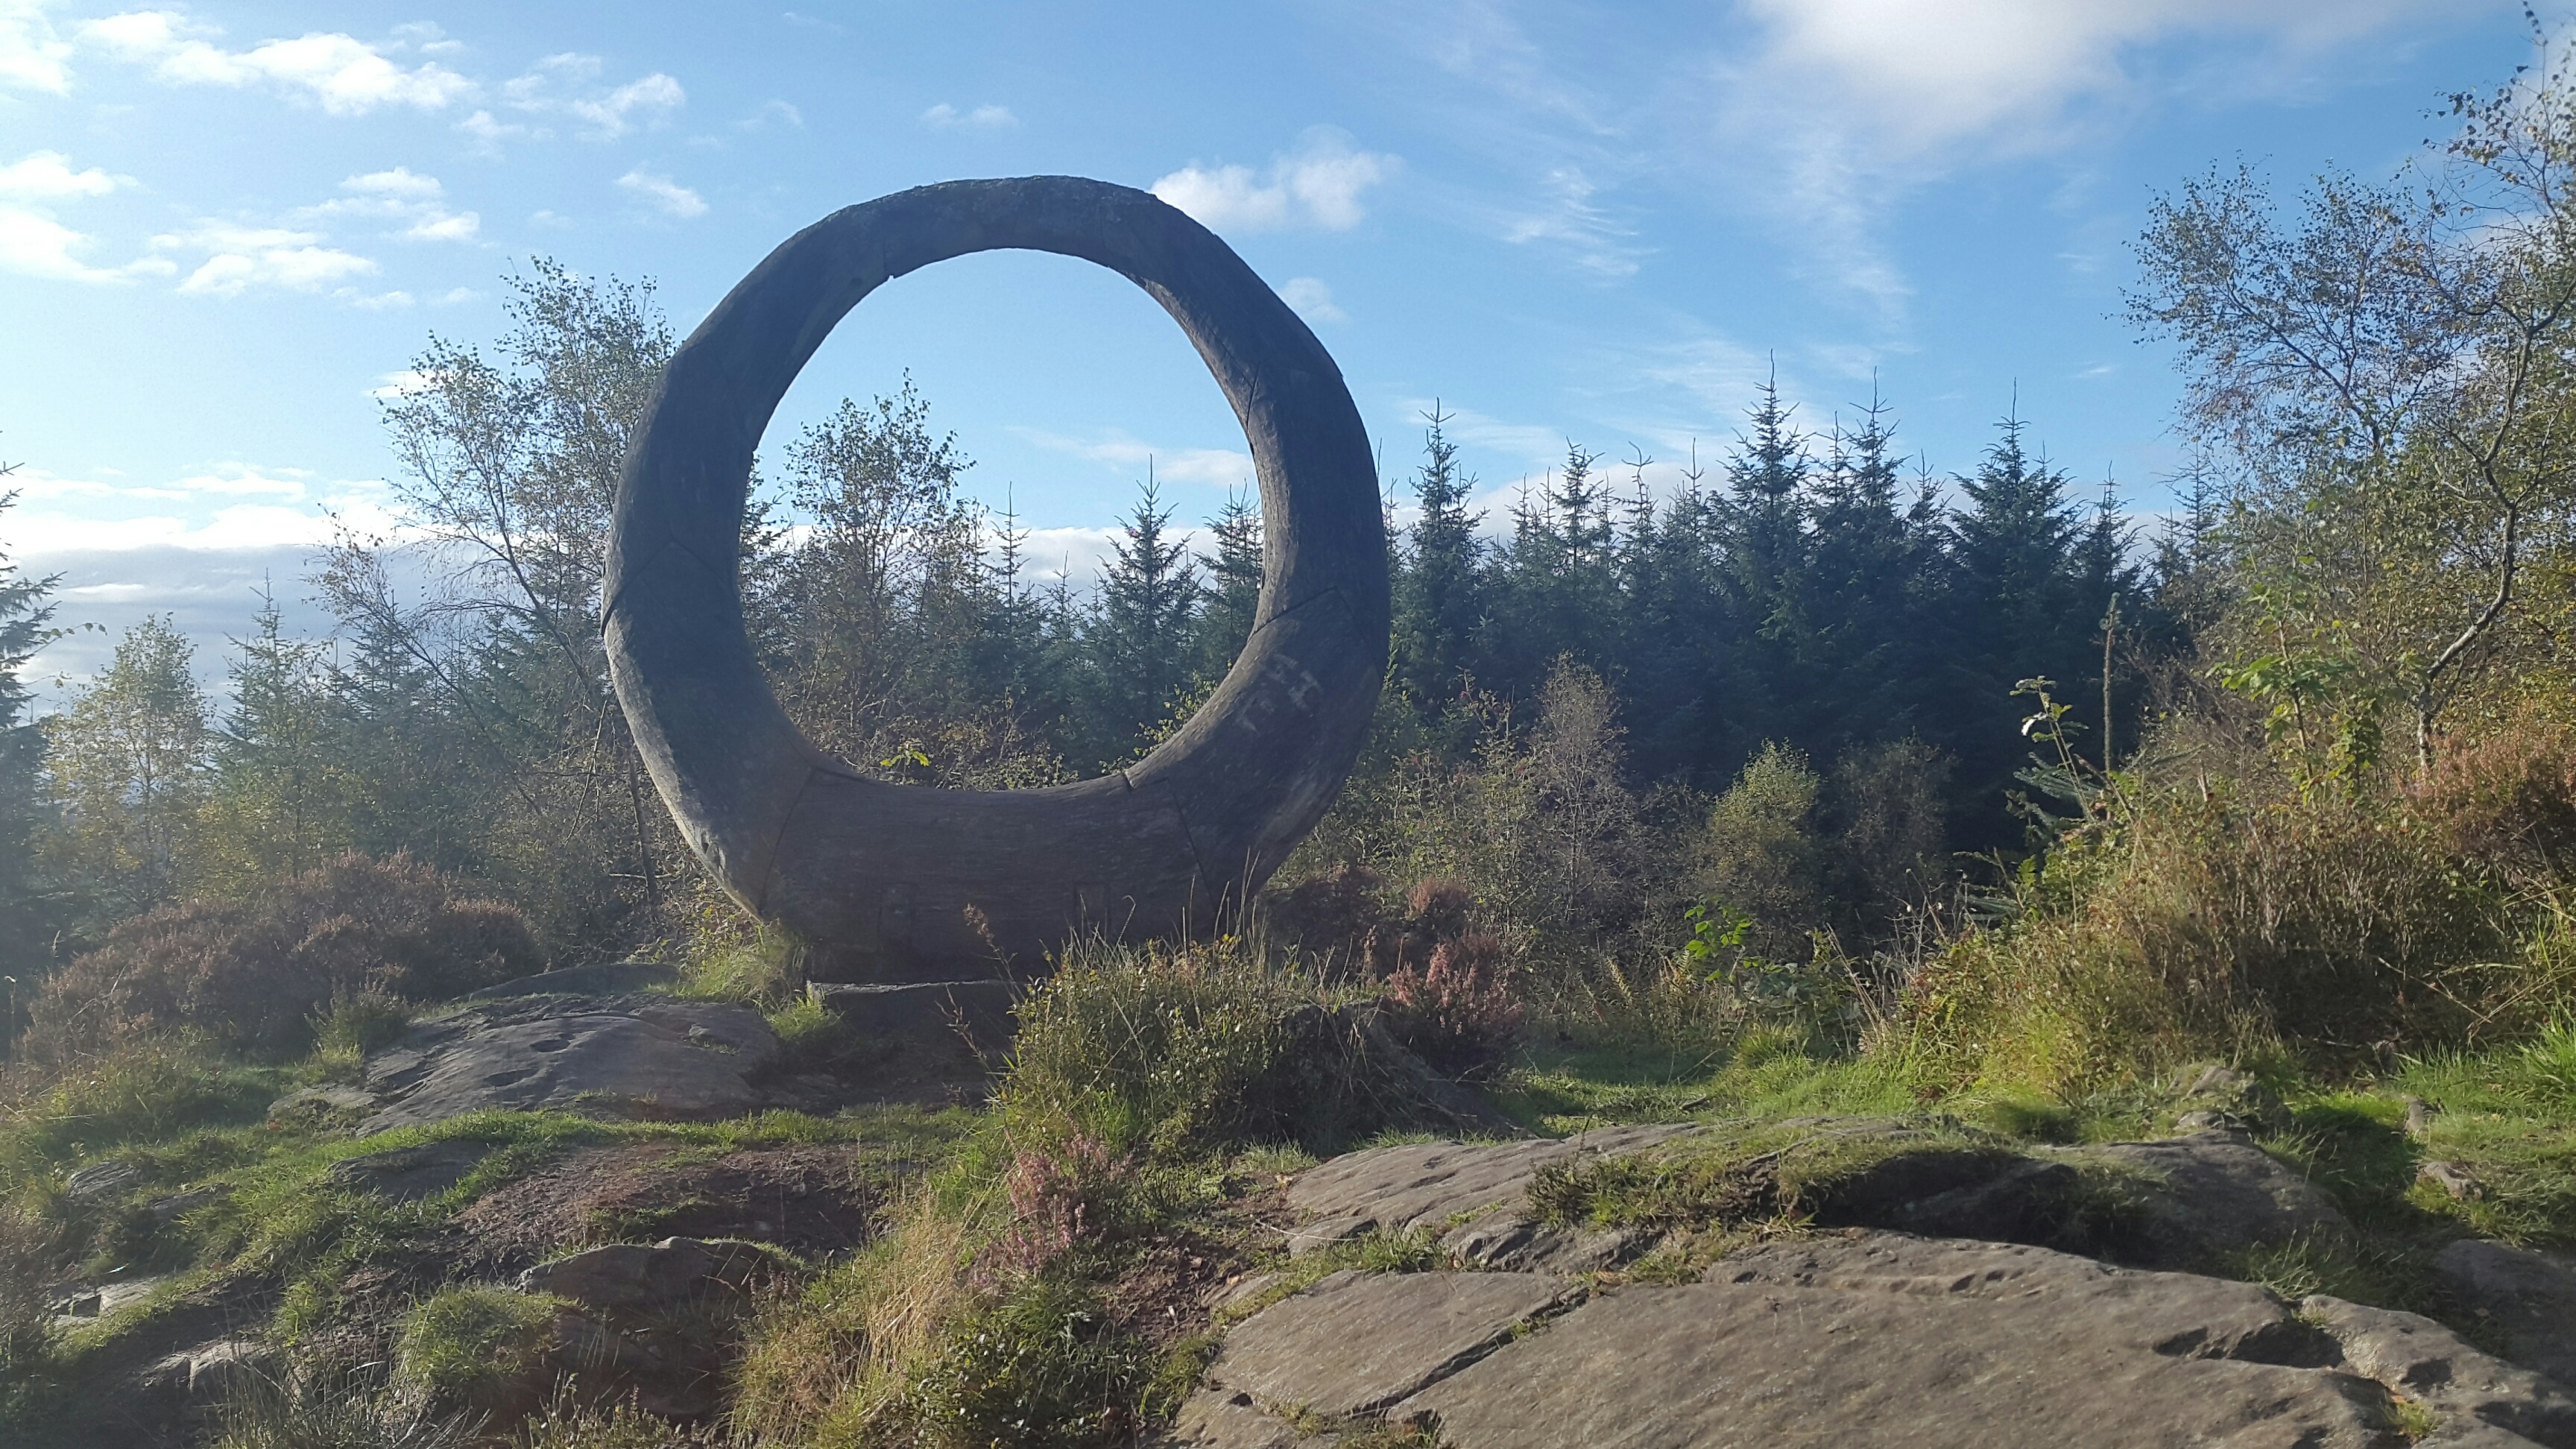 A photograph of a sculpture in an outdoor location. A large, round form is shown in front of trees. It appears to be made from stone.